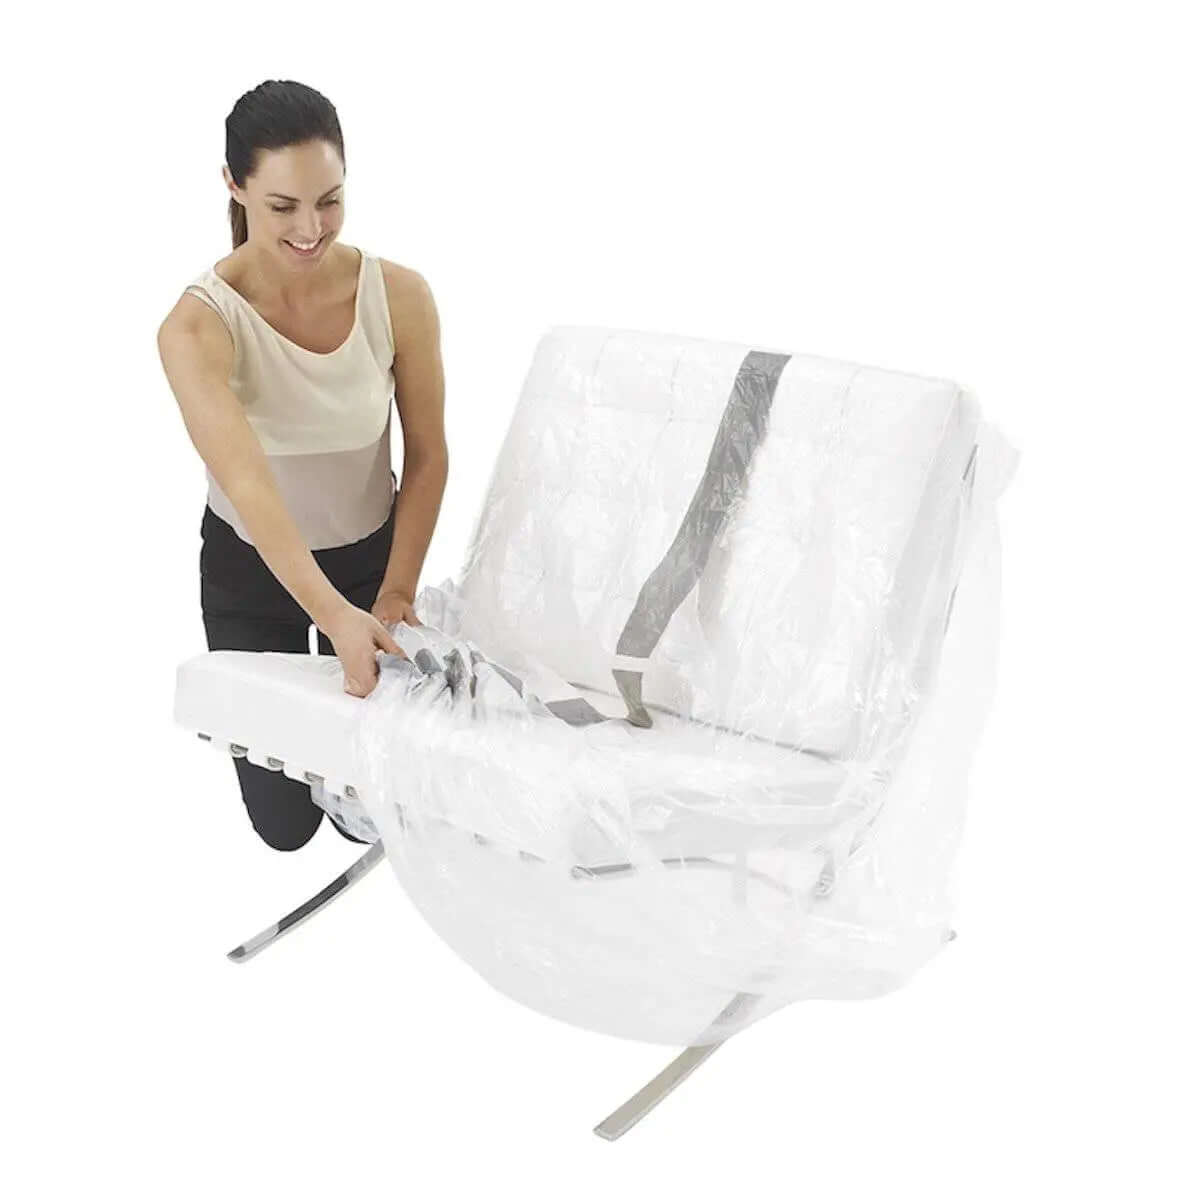 Furniture Protection Covers for Moving and Storage | Storage Bags and Covers | Packstore